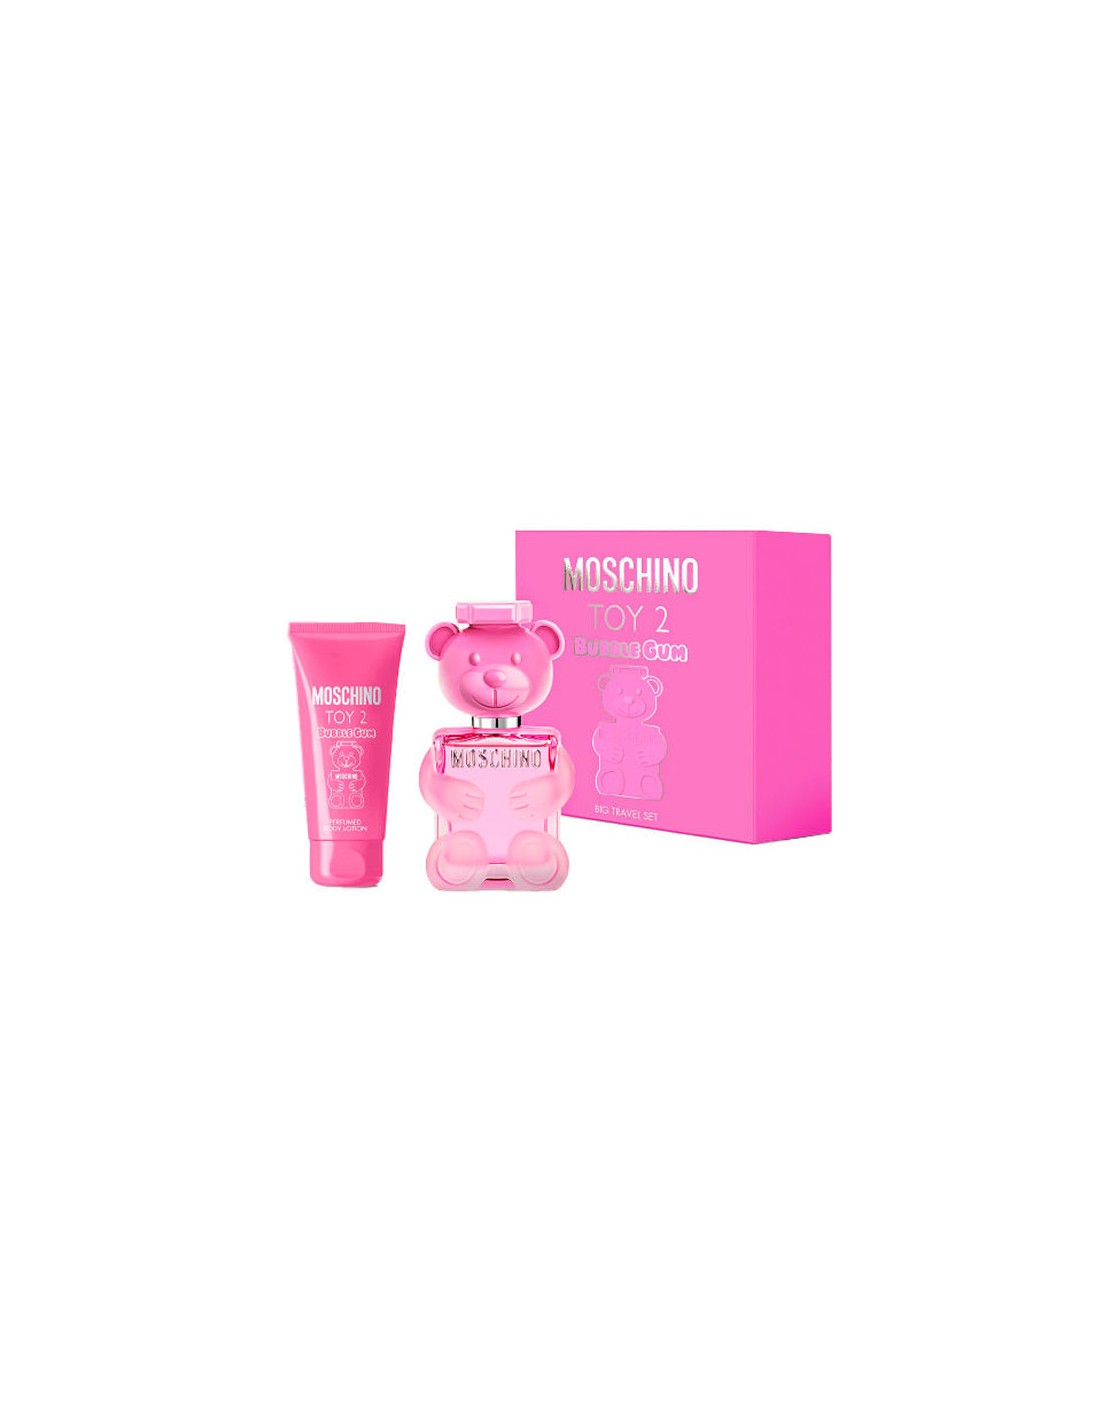 Moschino Toy 2 Bubble Gum Edt Spray 100ml Ts - Mall for All